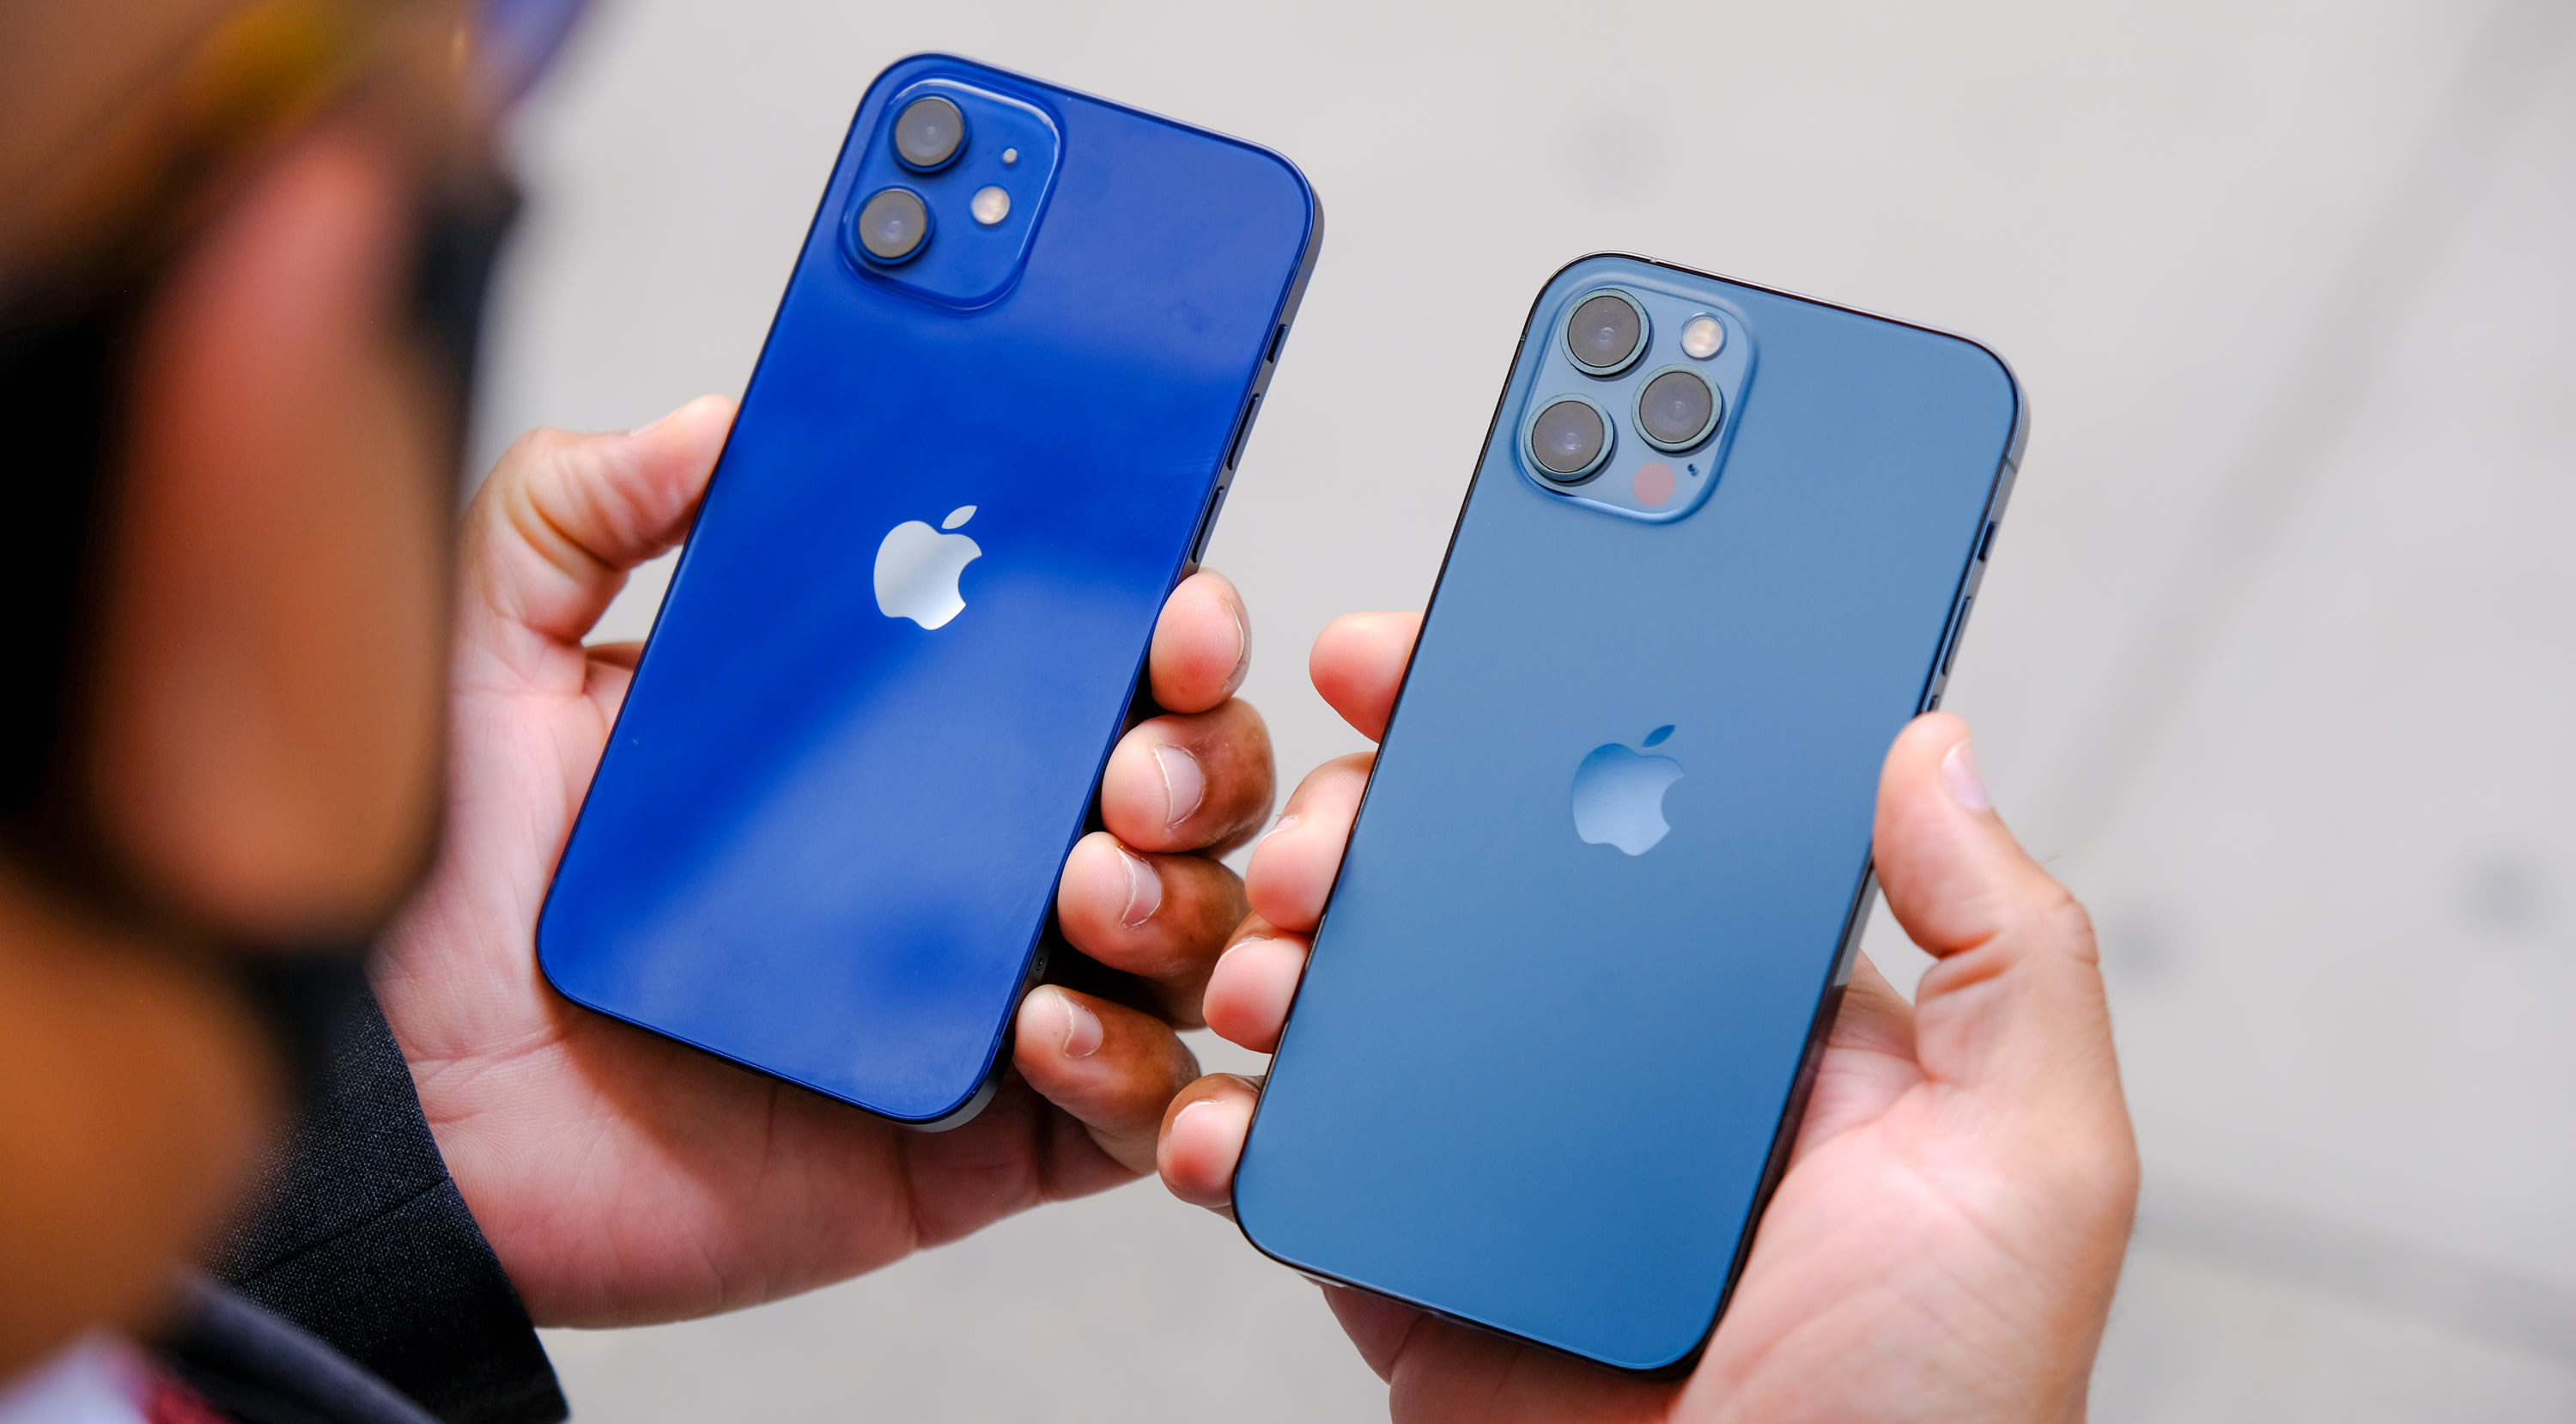 iPhone 12 and 12 Pro review: Apple enters the 5G era | Engadget